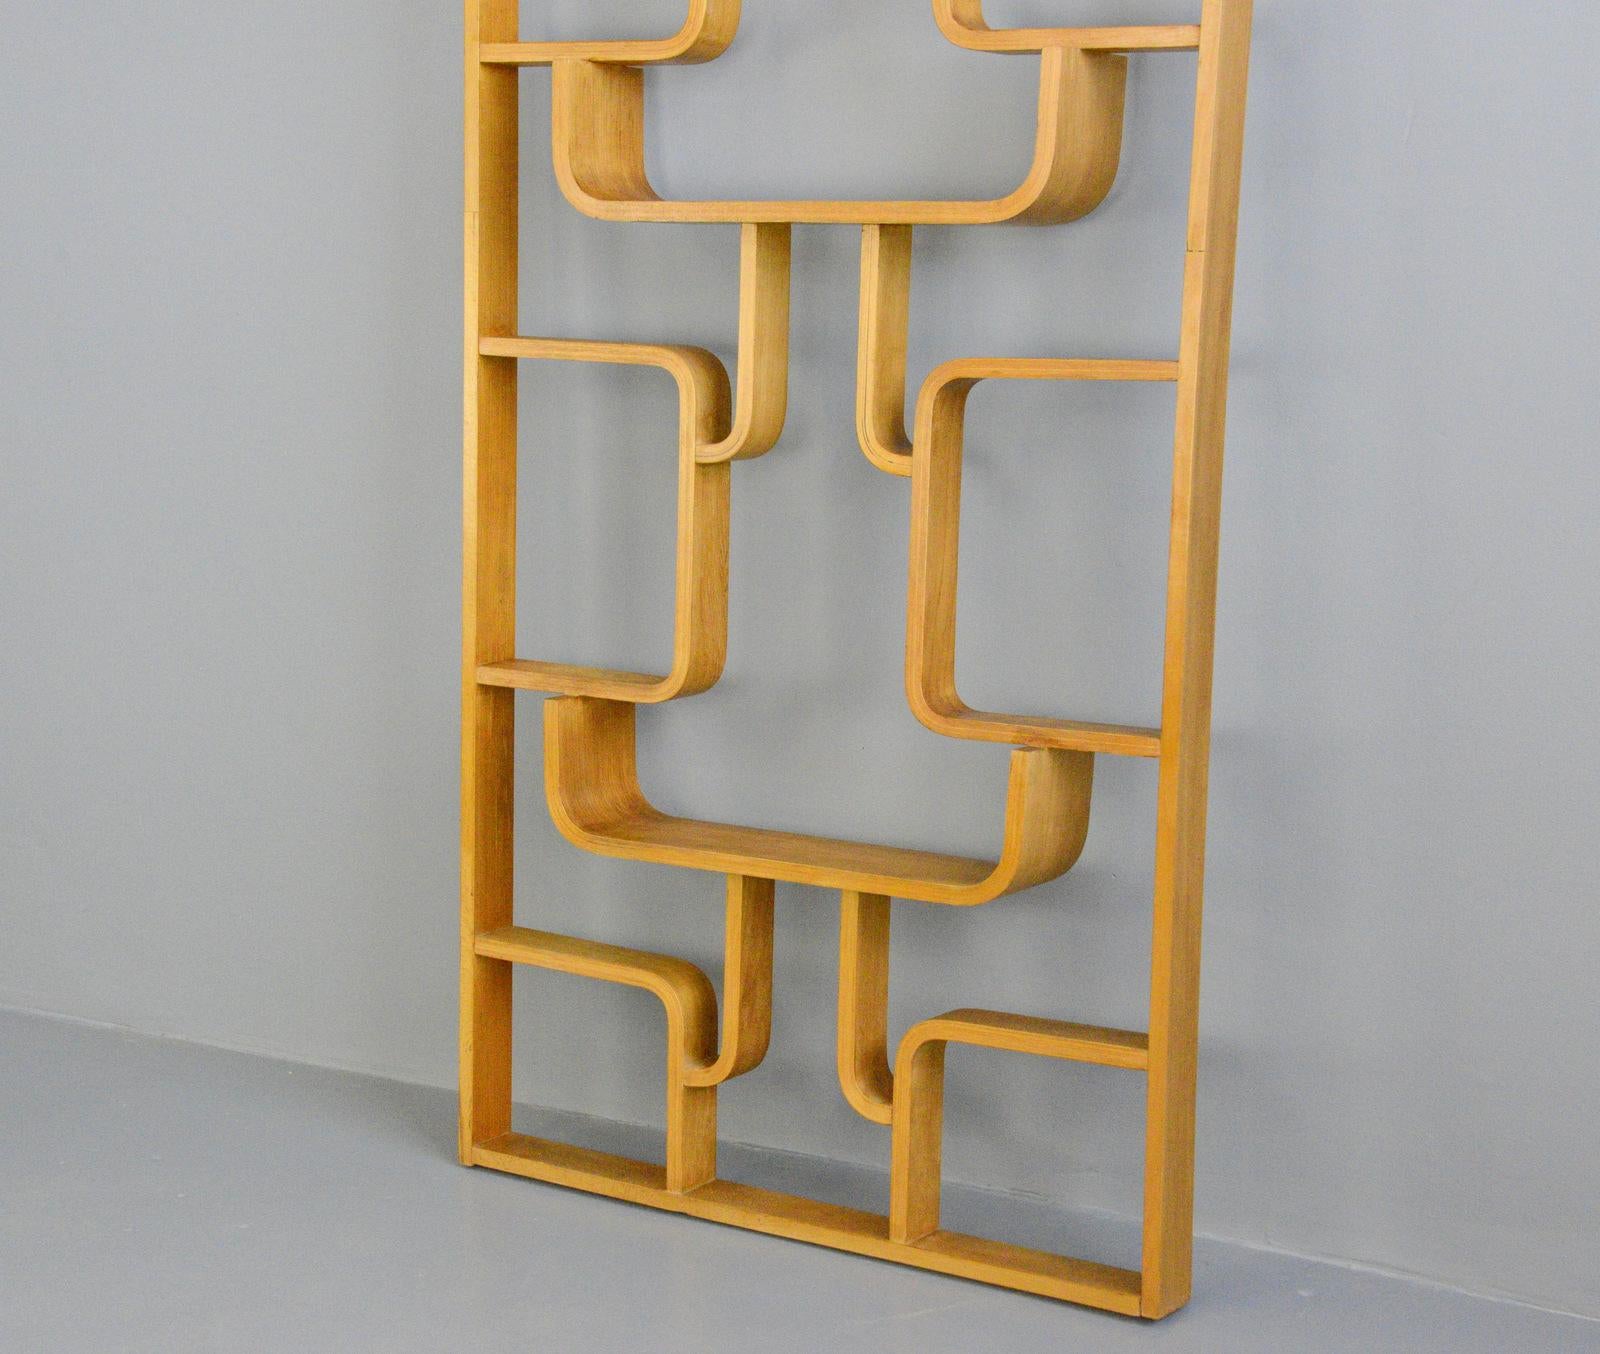 Midcentury room divider by Ludvik Volak, circa 1960s

- Made from curved beech
- Designed by Ludvik Volak
- Produced by Drevopodnik Holesov
- Czech, 1960s
- Measures: 225cm tall x 91cm wide x 16cm deep

Condition report:

Some age marks